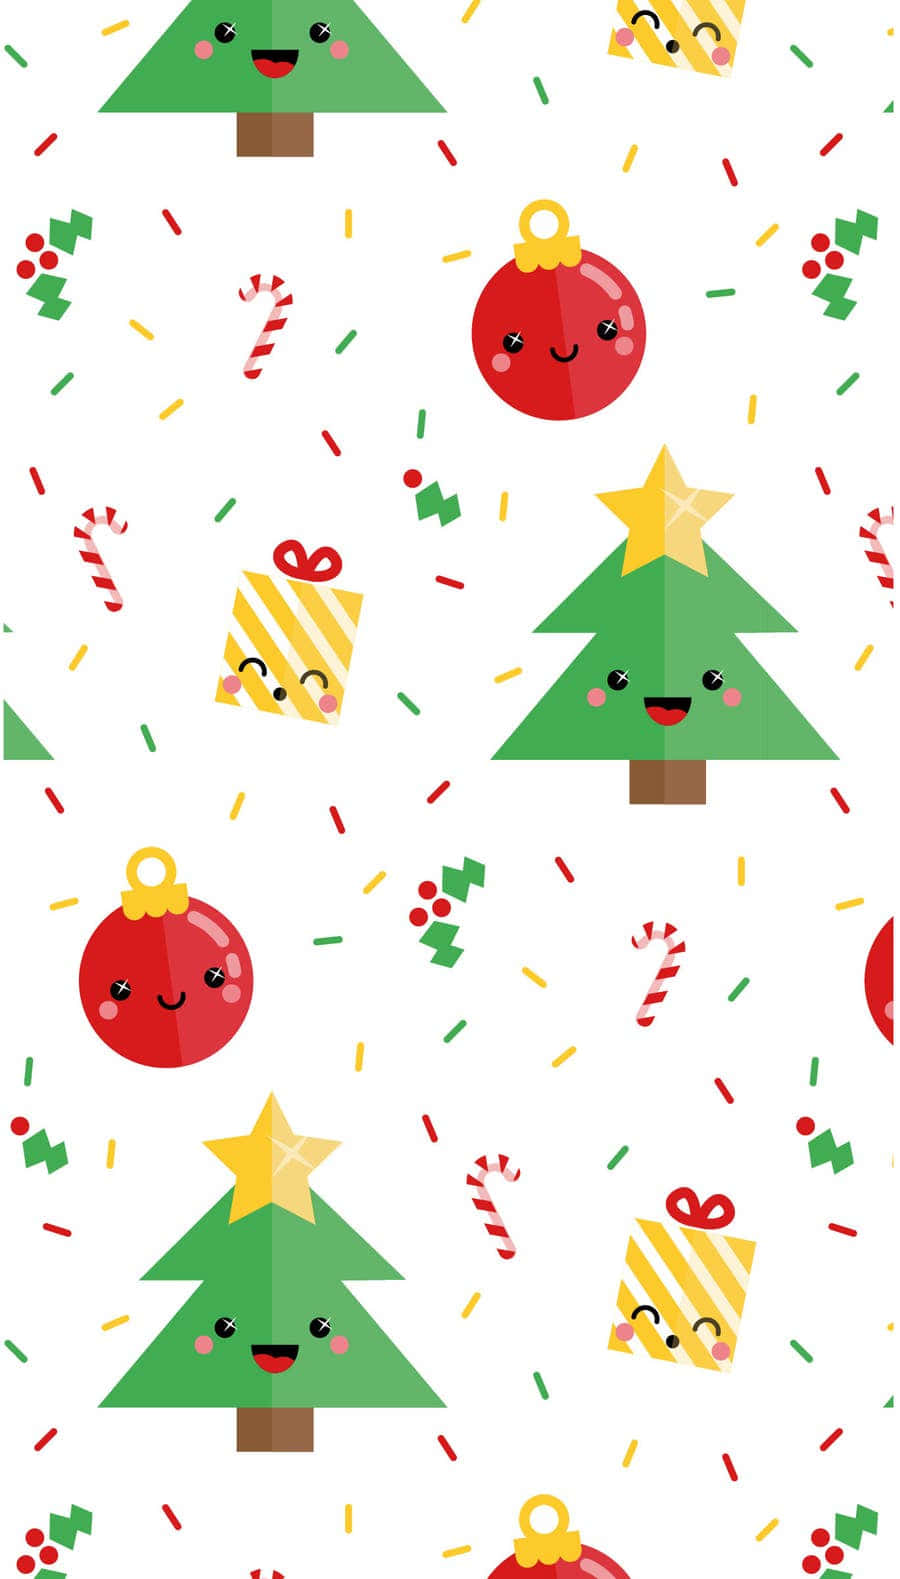 Make Calls, Text, and Enjoy all Your Favorite Christmas Games on Your Phone